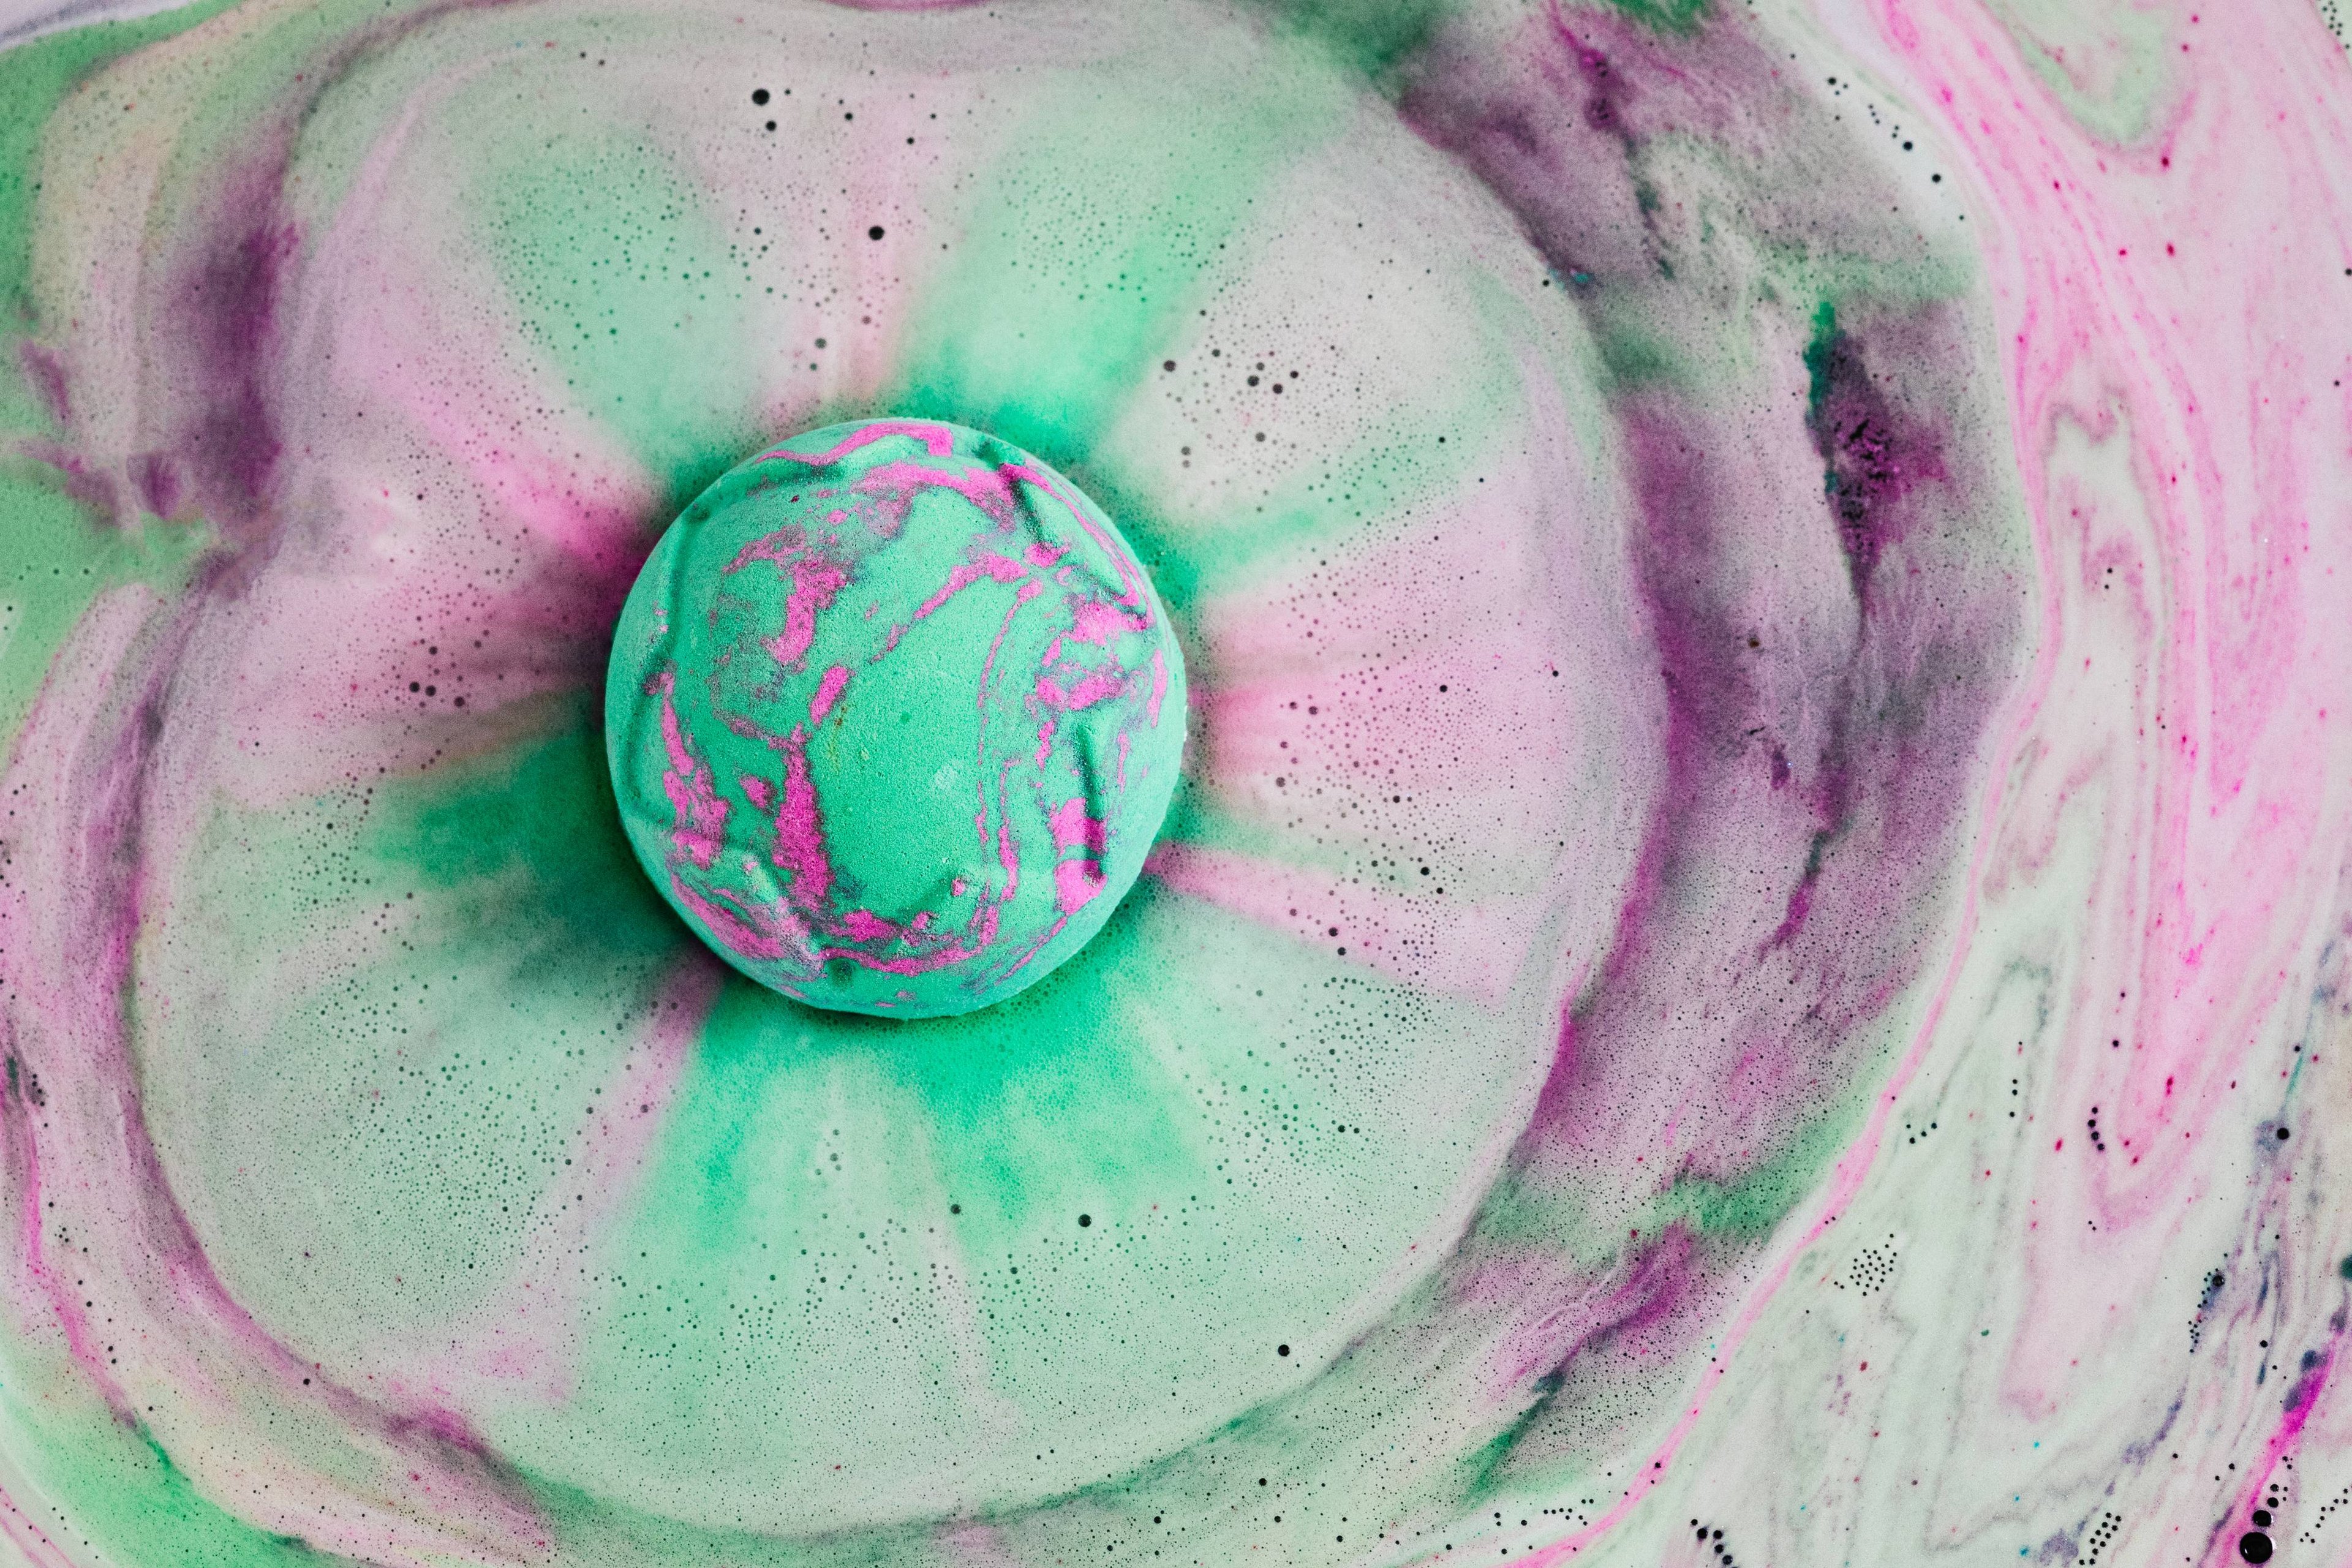 The bath bomb sits on top of the water, dispersing foamy pink and green, frothy swirls. 